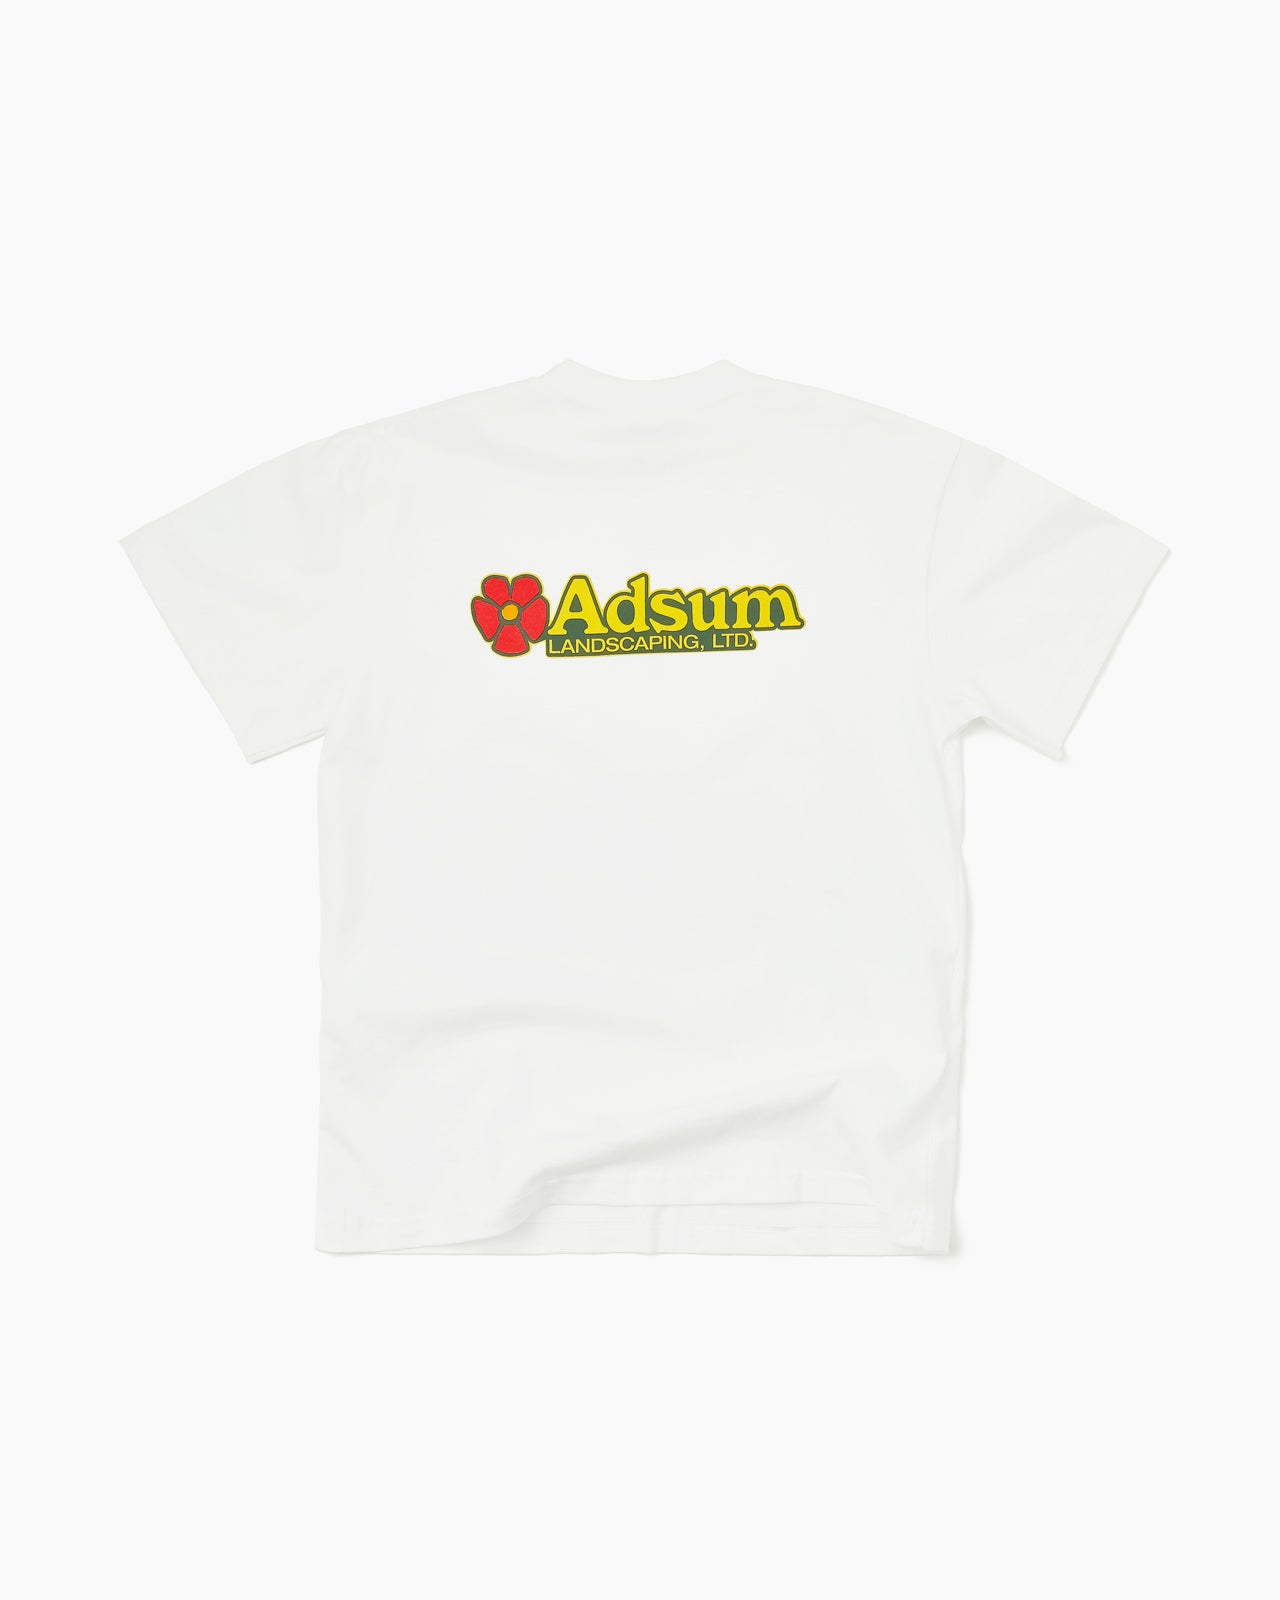 Land Scaping Tee White